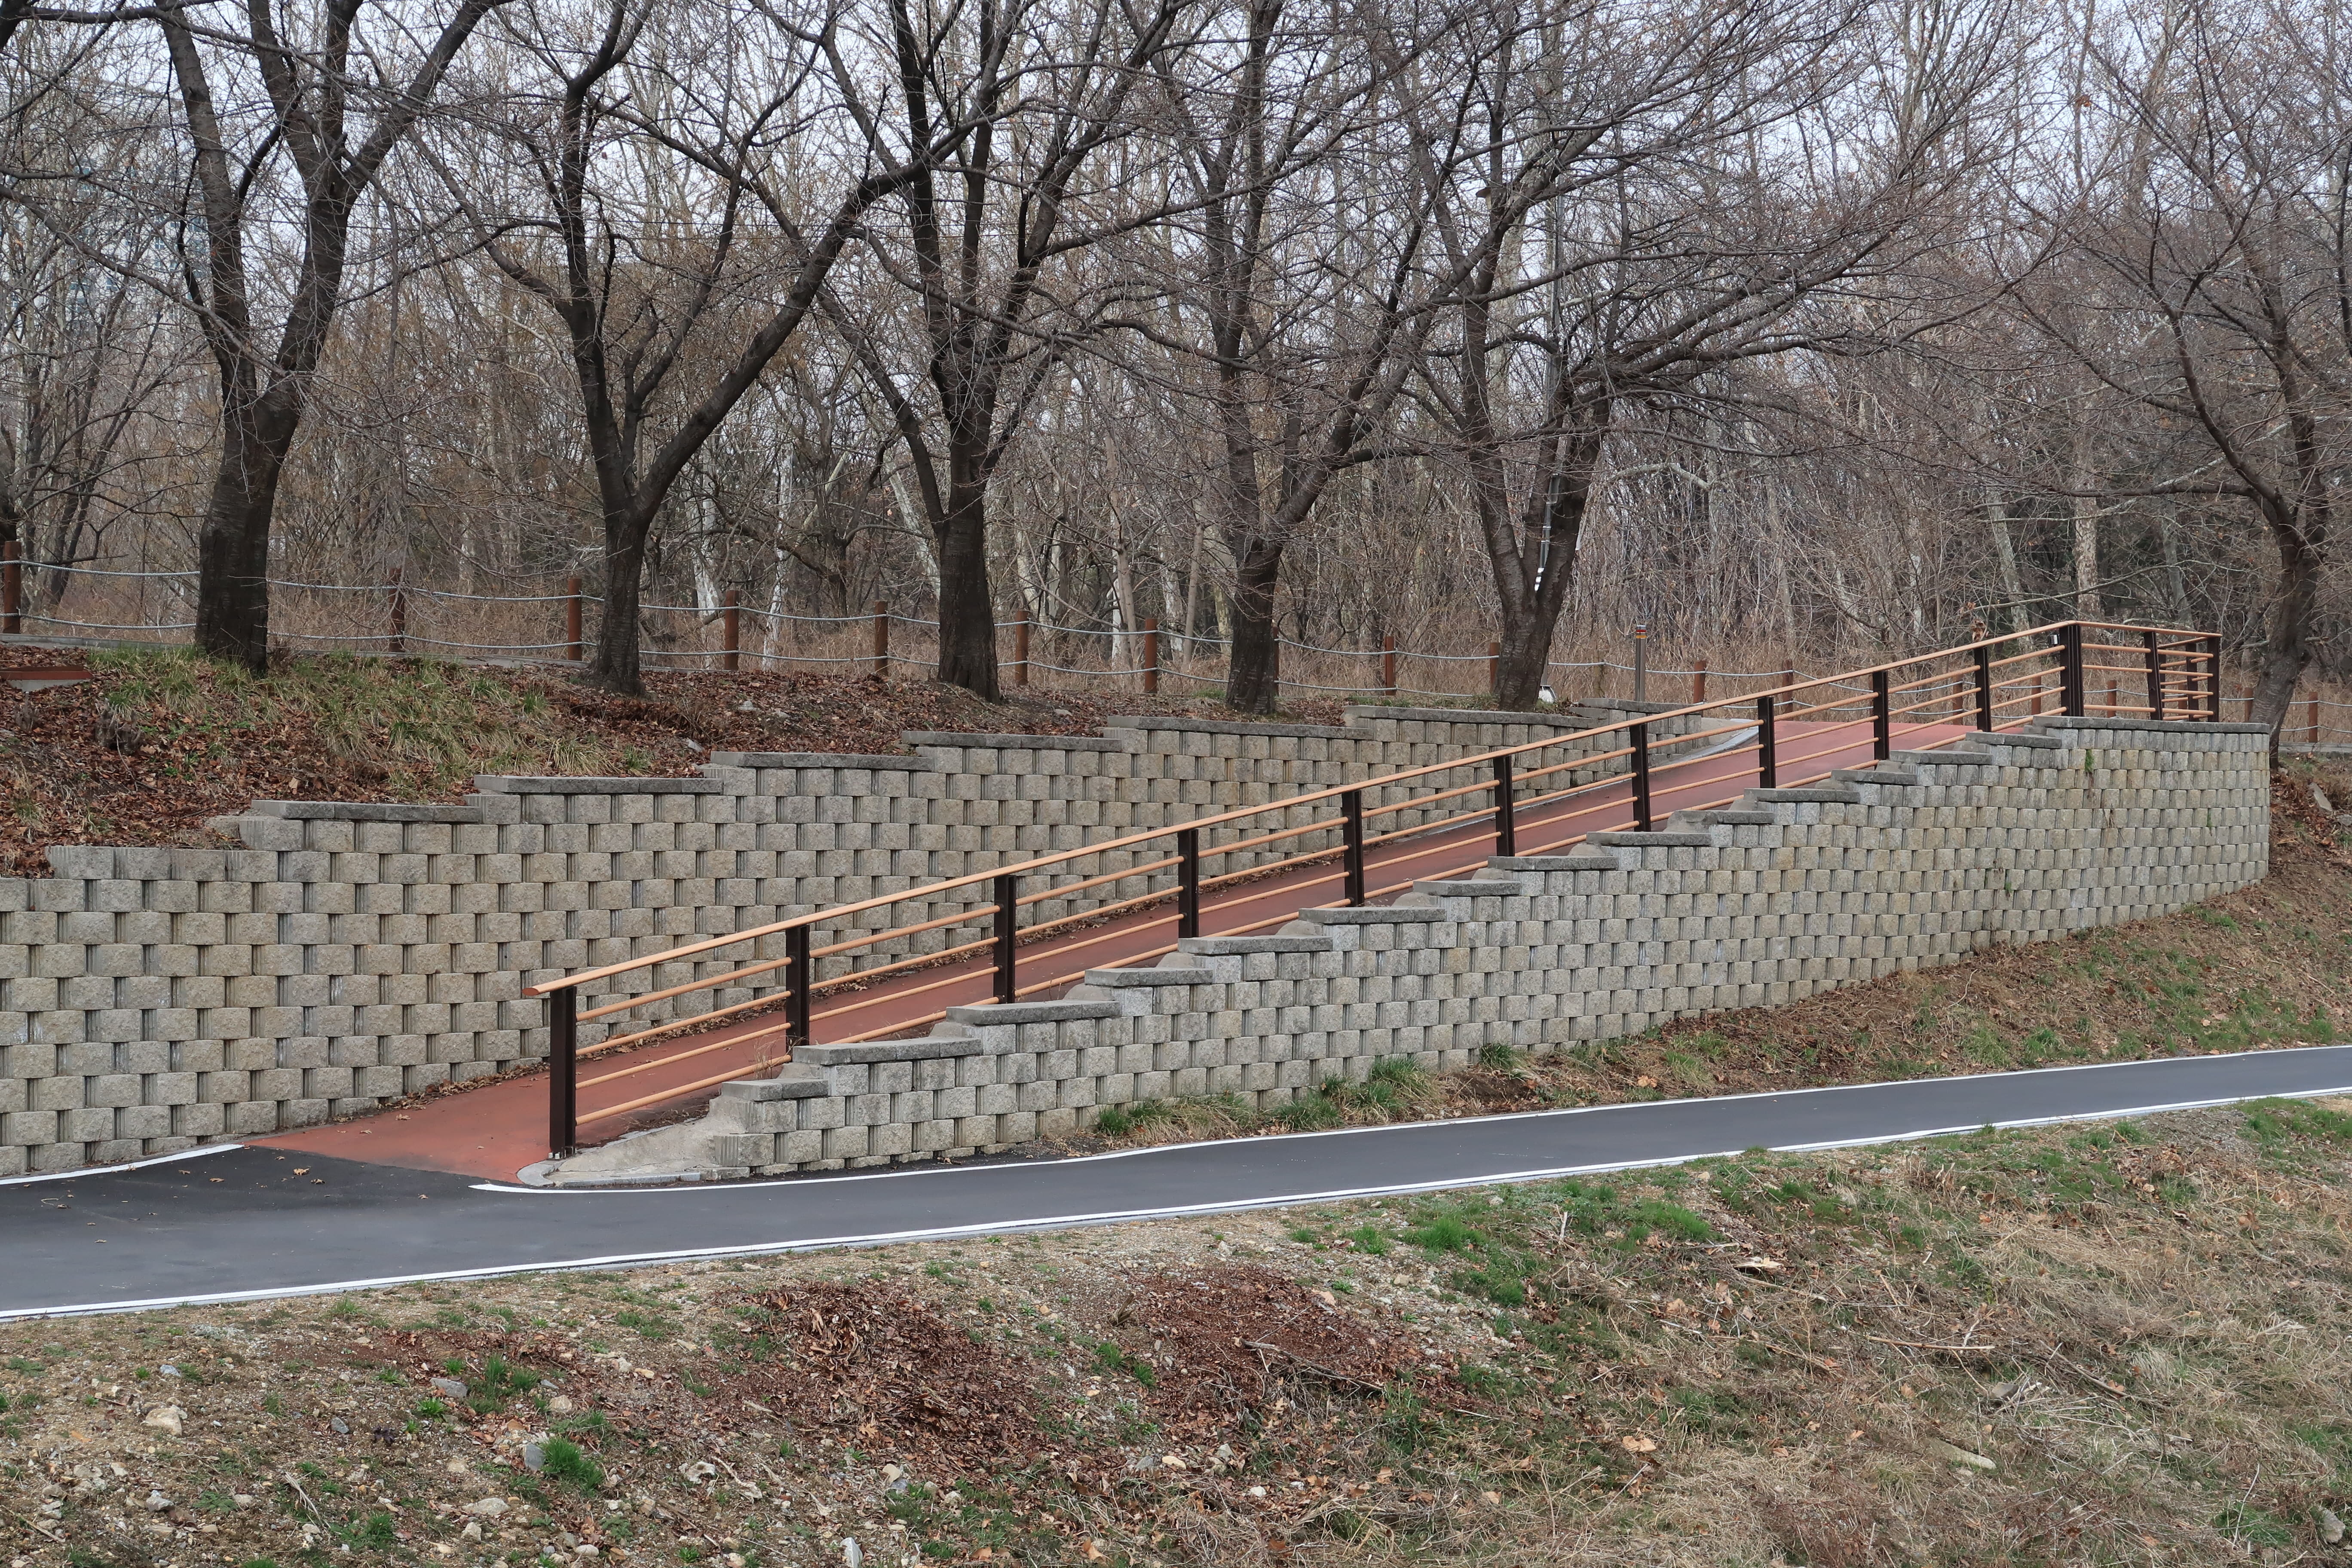 Road surface0 : A inclined walking trail with handrail on the right side